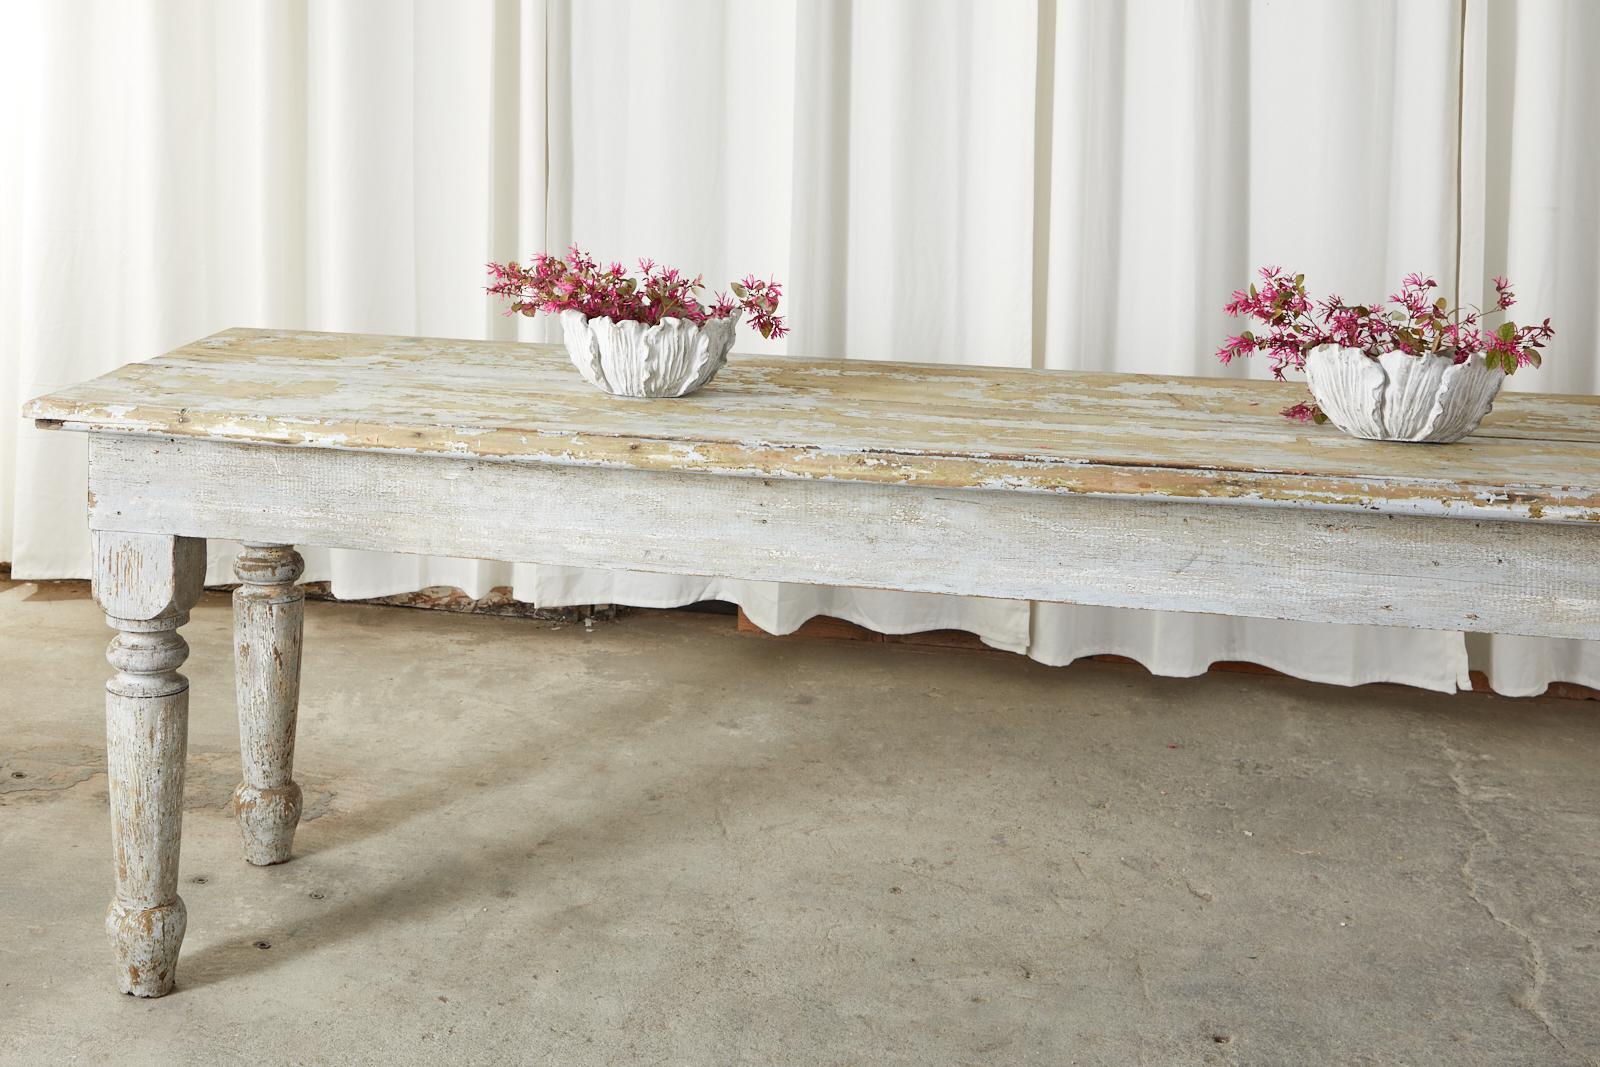 Massive late 19th century French farmhouse harvest table constructed from pine. The large scale table features a beautiful aged, distressed painted finish. At nearly 12 feet long this table is a very versatile piece with a plank top measuring 34